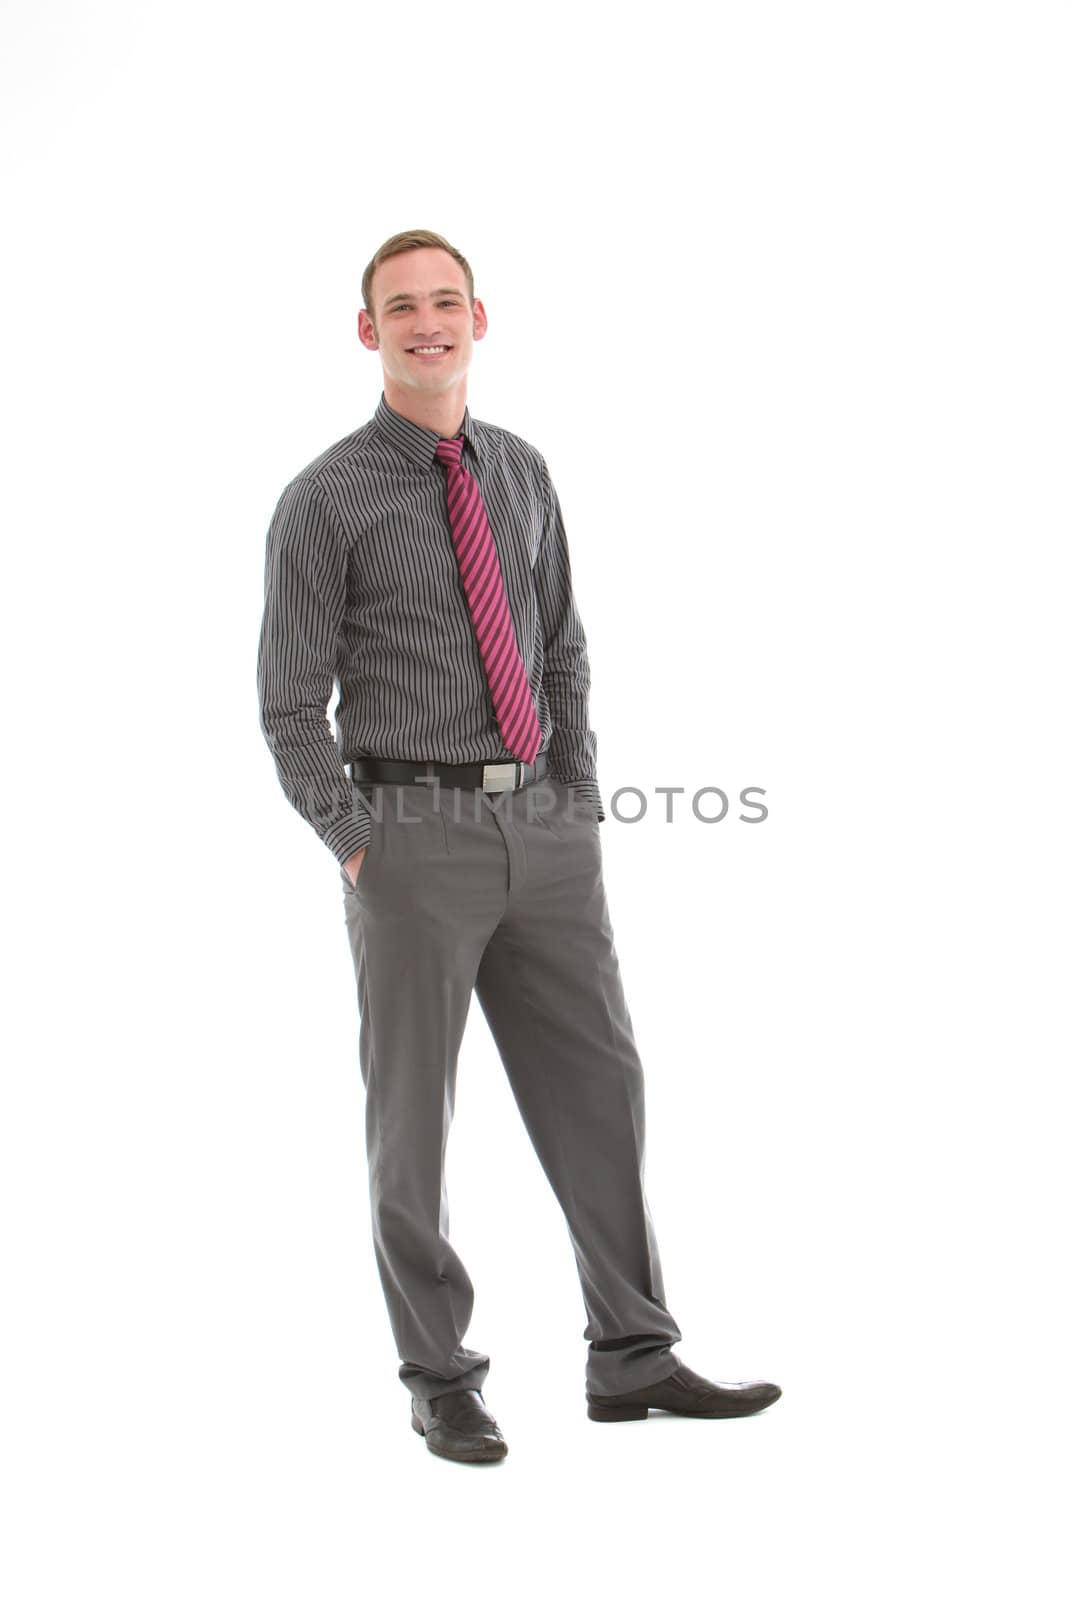 Elegant stylish businessman in striped grey shirt and trousers with his hands casually in his pockets posing full length on white studio background